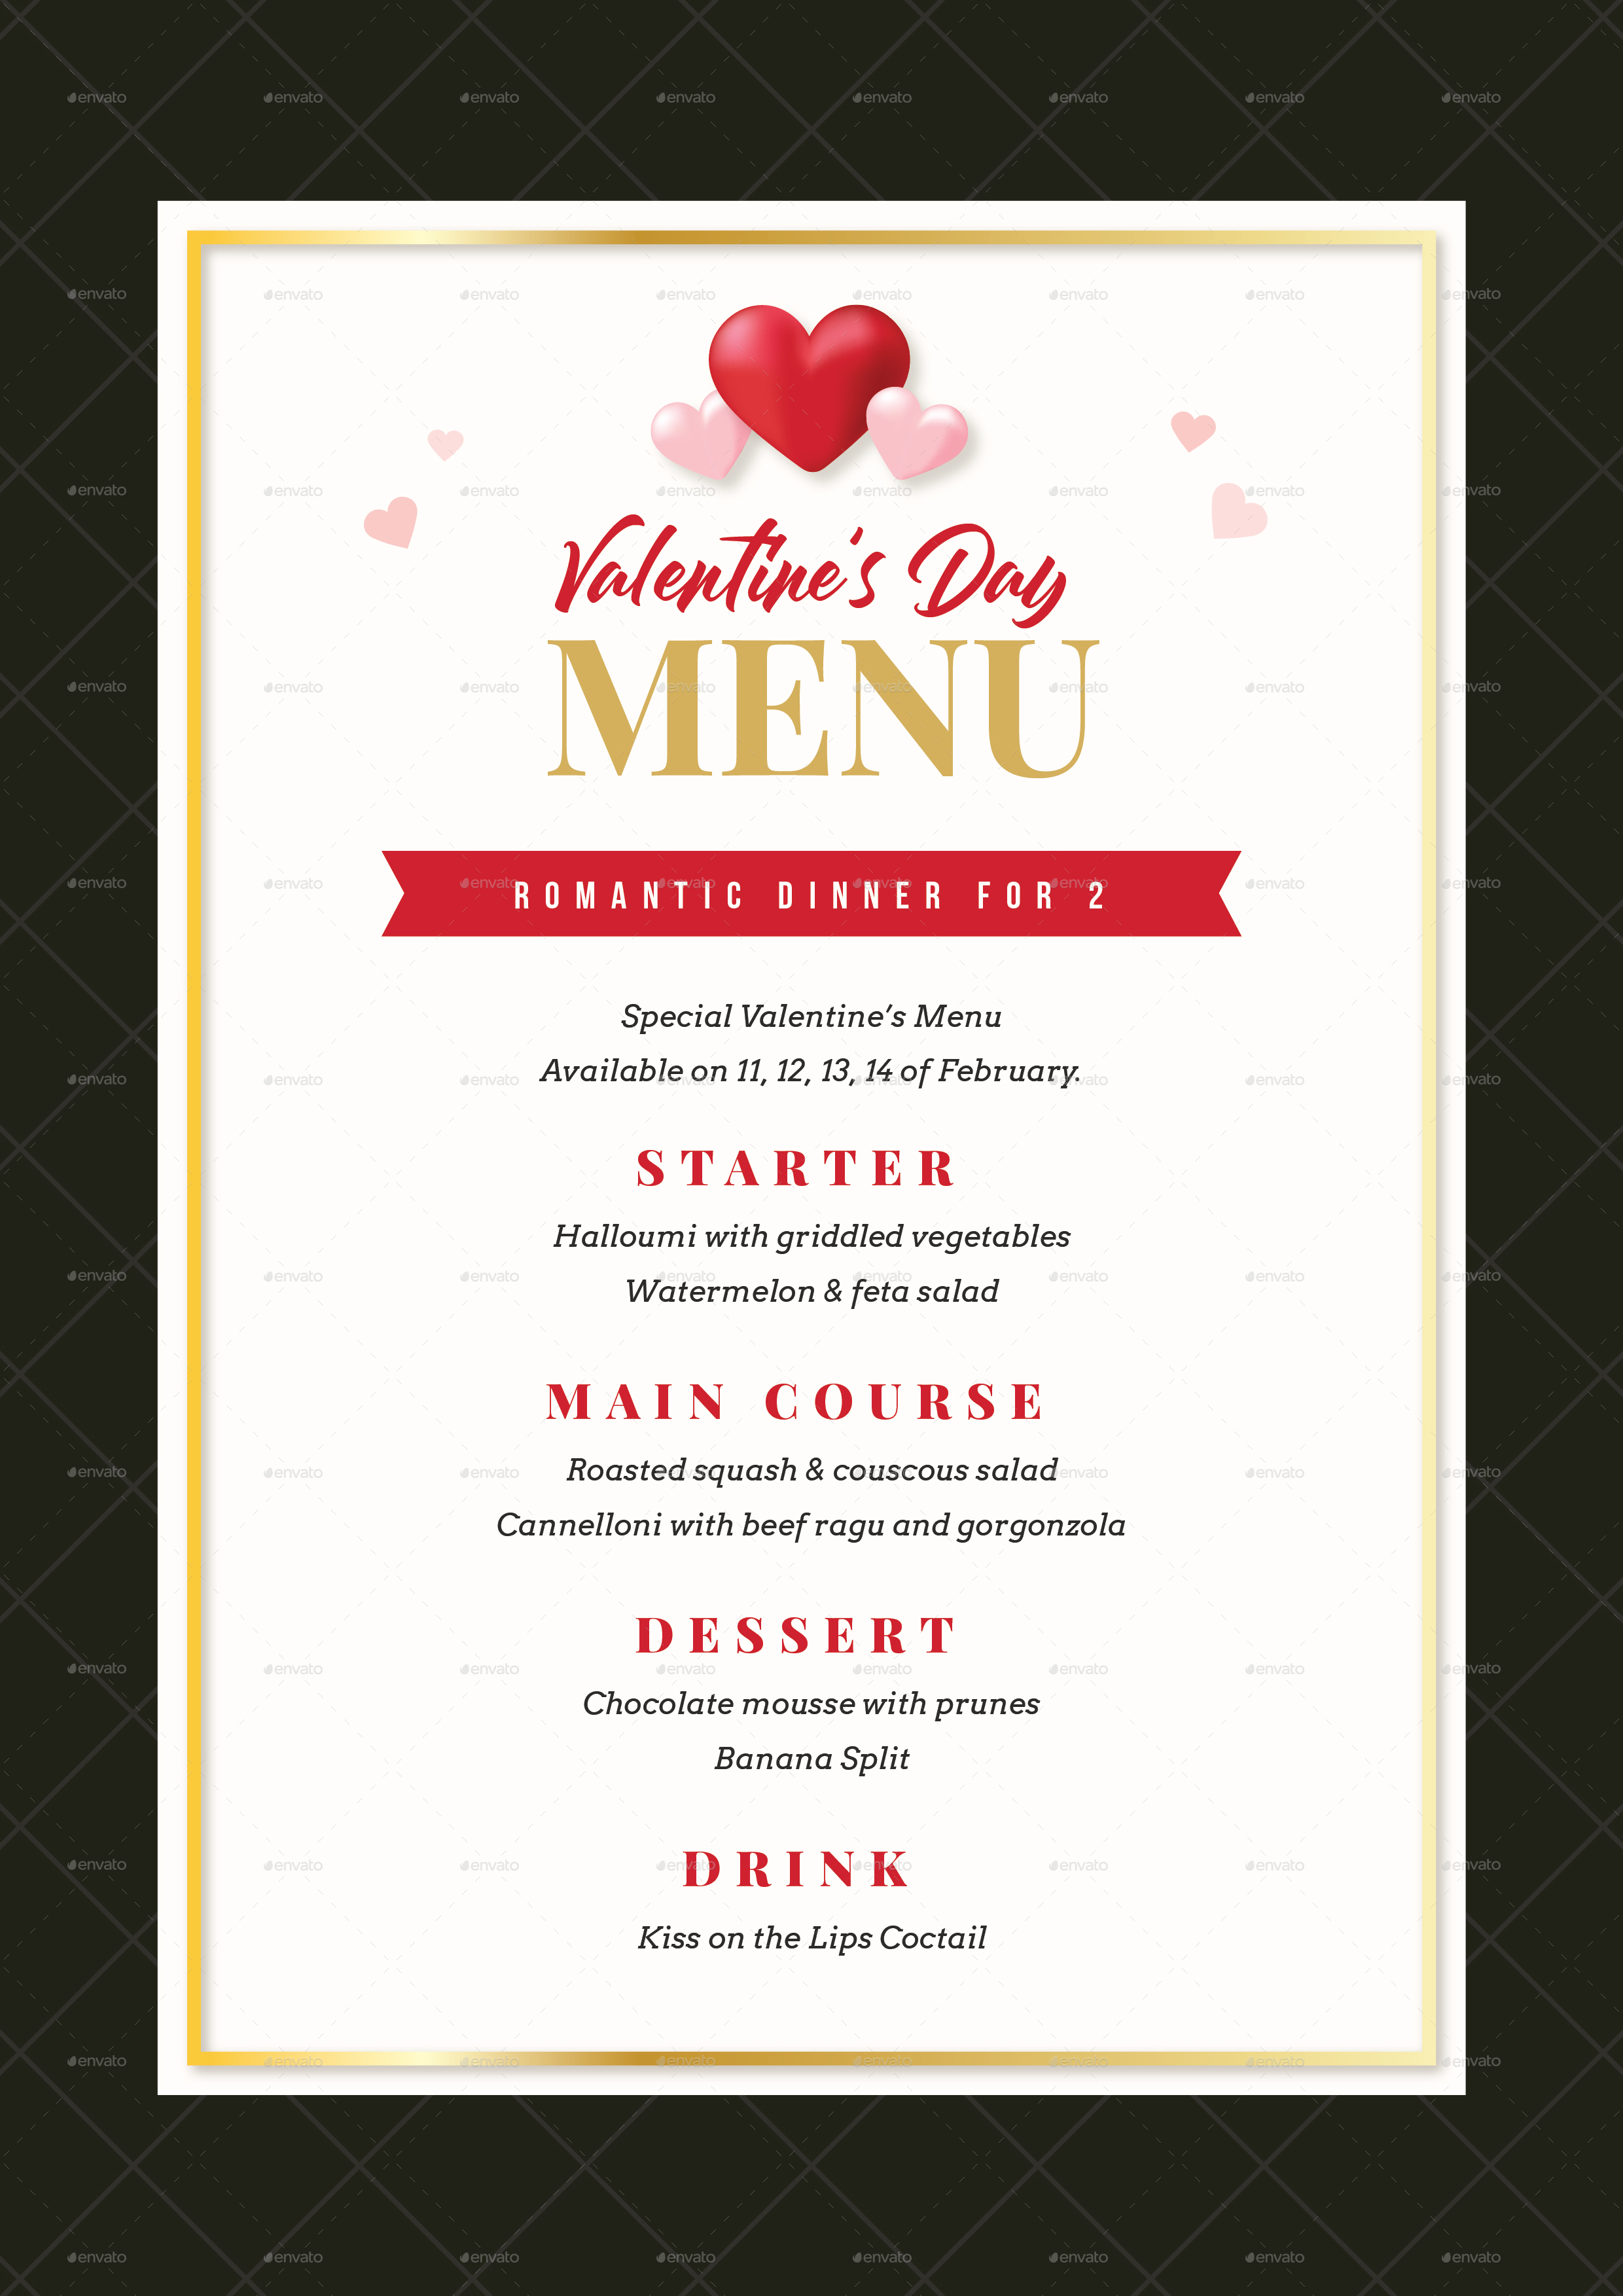 valentine-dinner-flyer-menu-template-by-vector-vactory-graphicriver